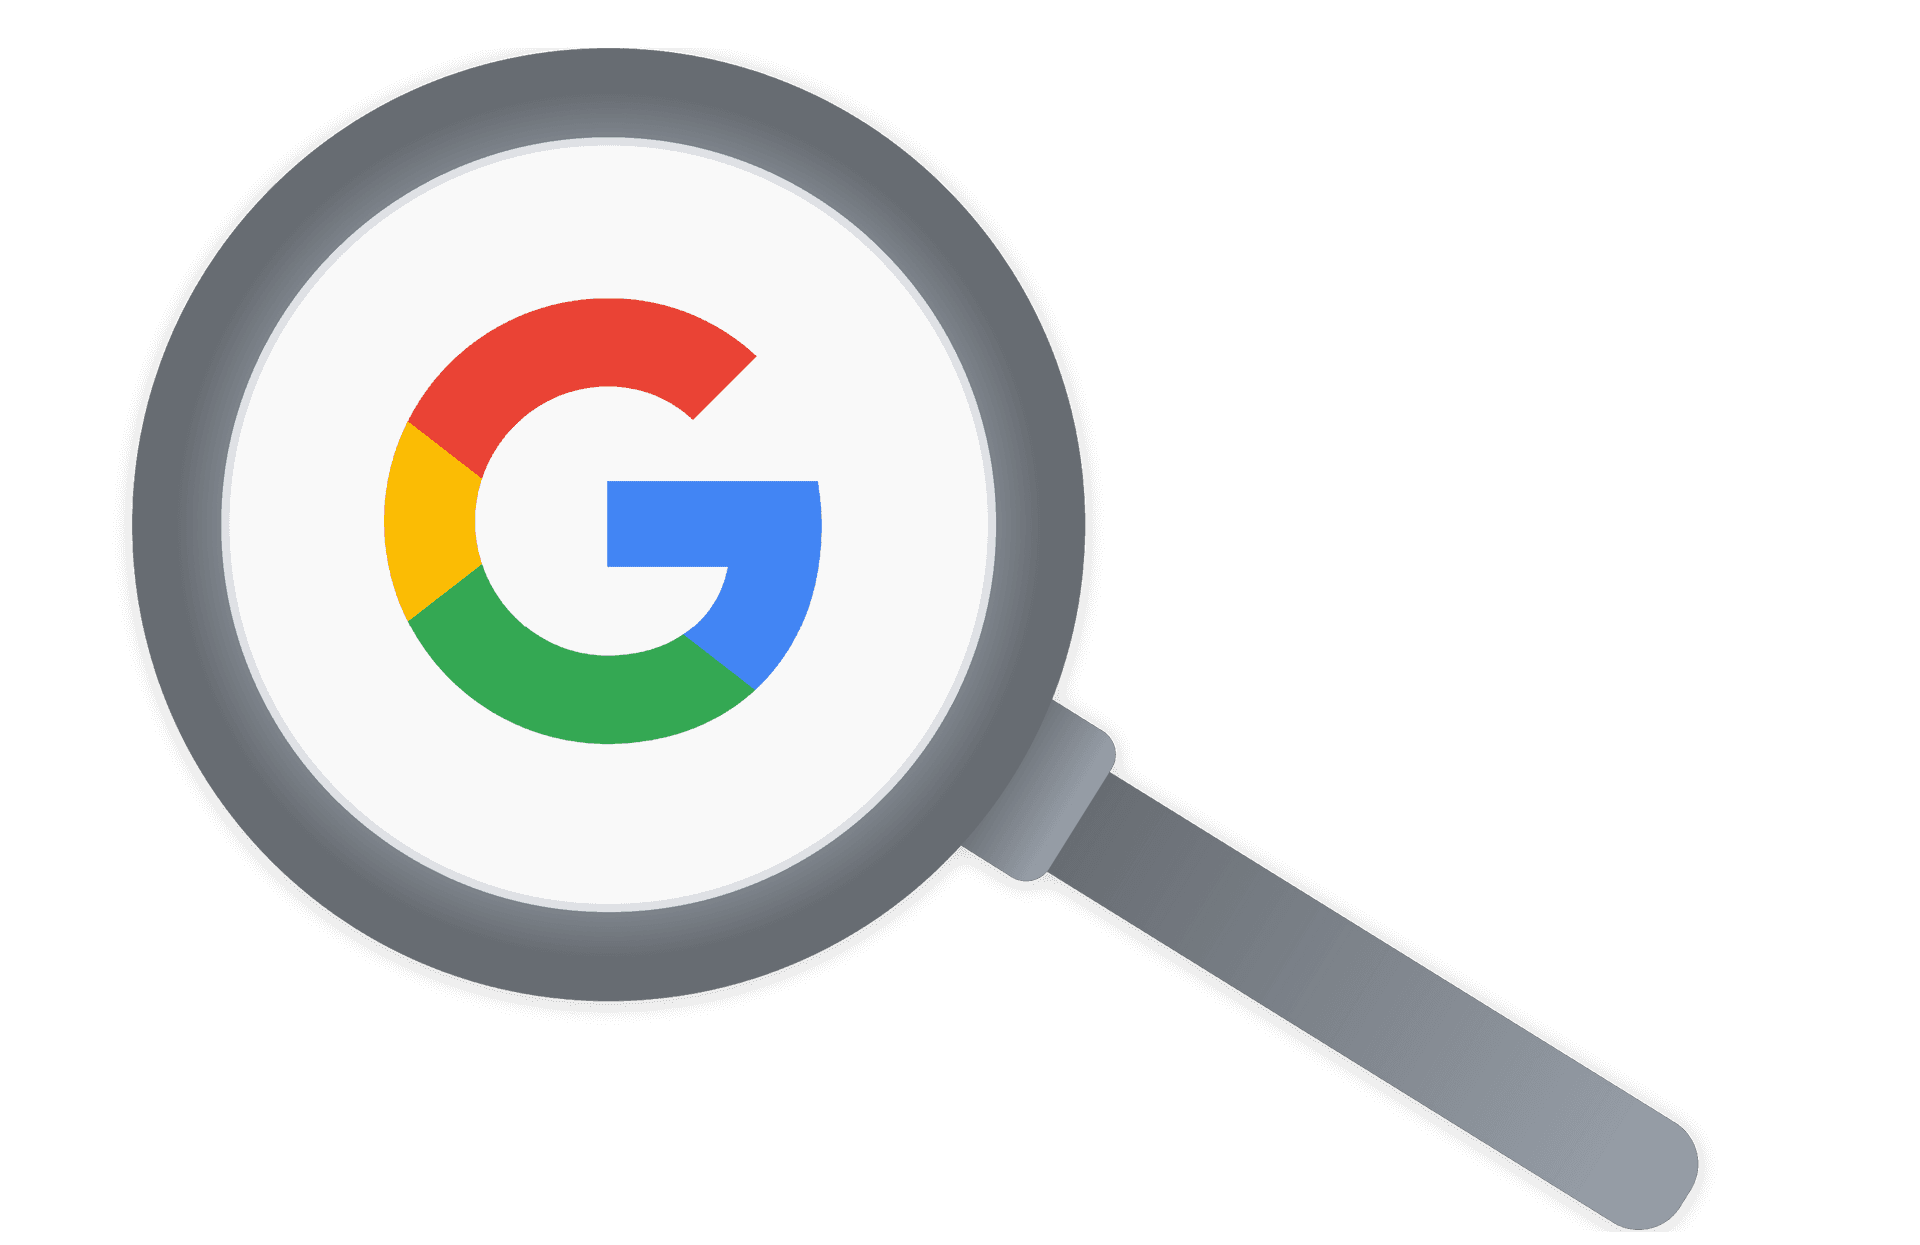 How does Google`s search ranking work?